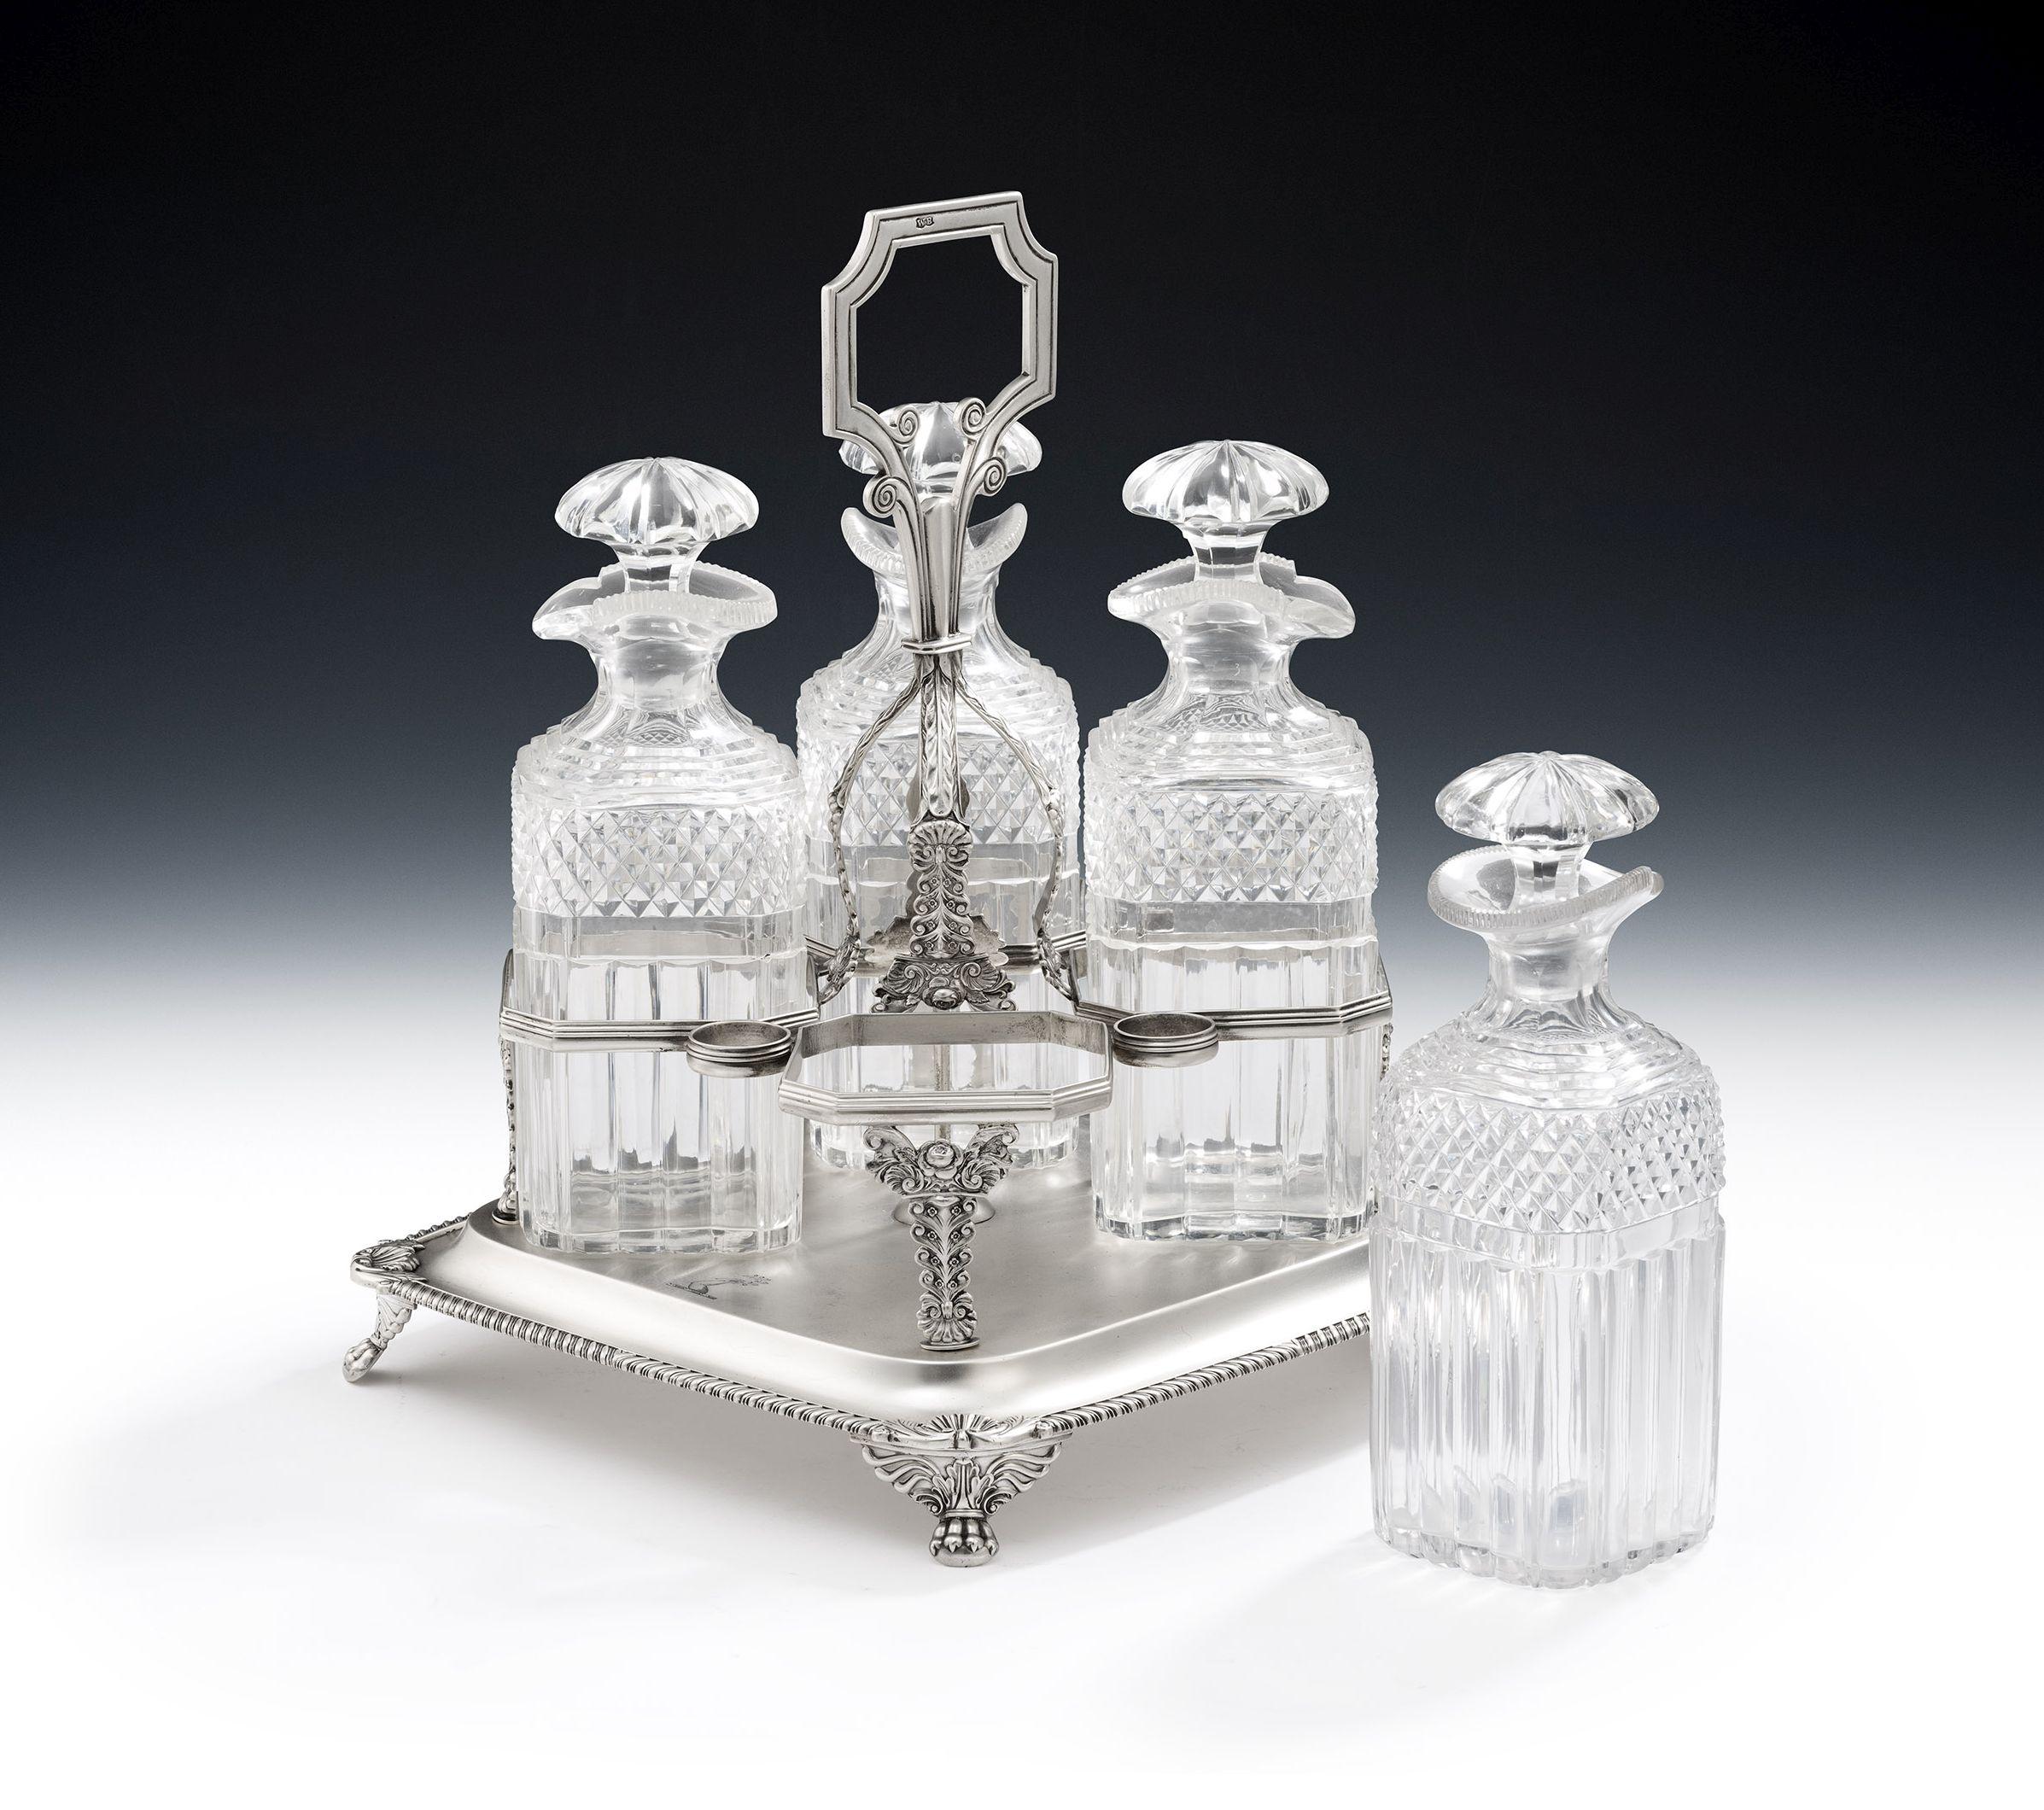 George IV George iv Four Bottle Decanter Stand, London, 1823 by William Bateman For Sale